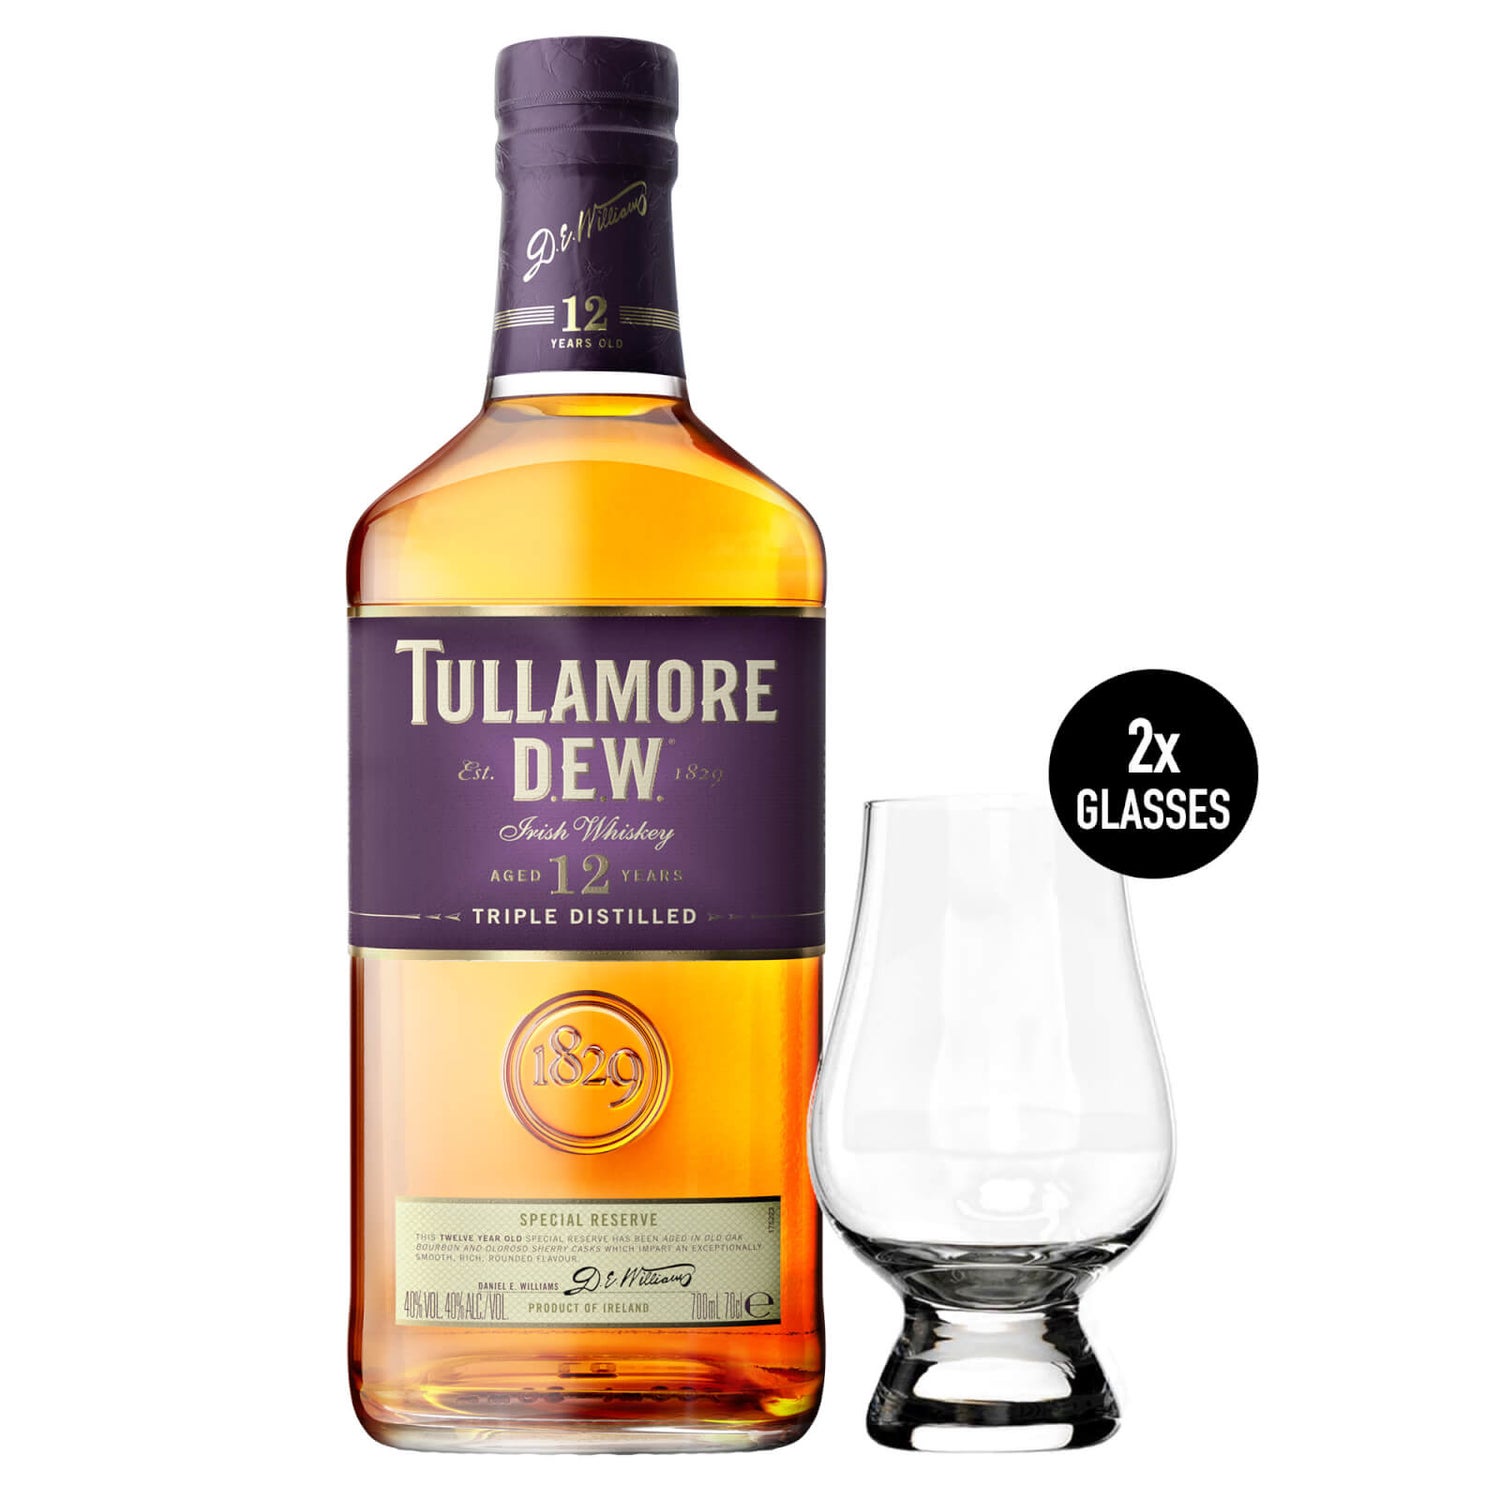 Tullamore D.E.W. 12 Year Old Special Reserve Irish Whiskey 70cl + 2 Glencairn Glasses in a Presentation Box